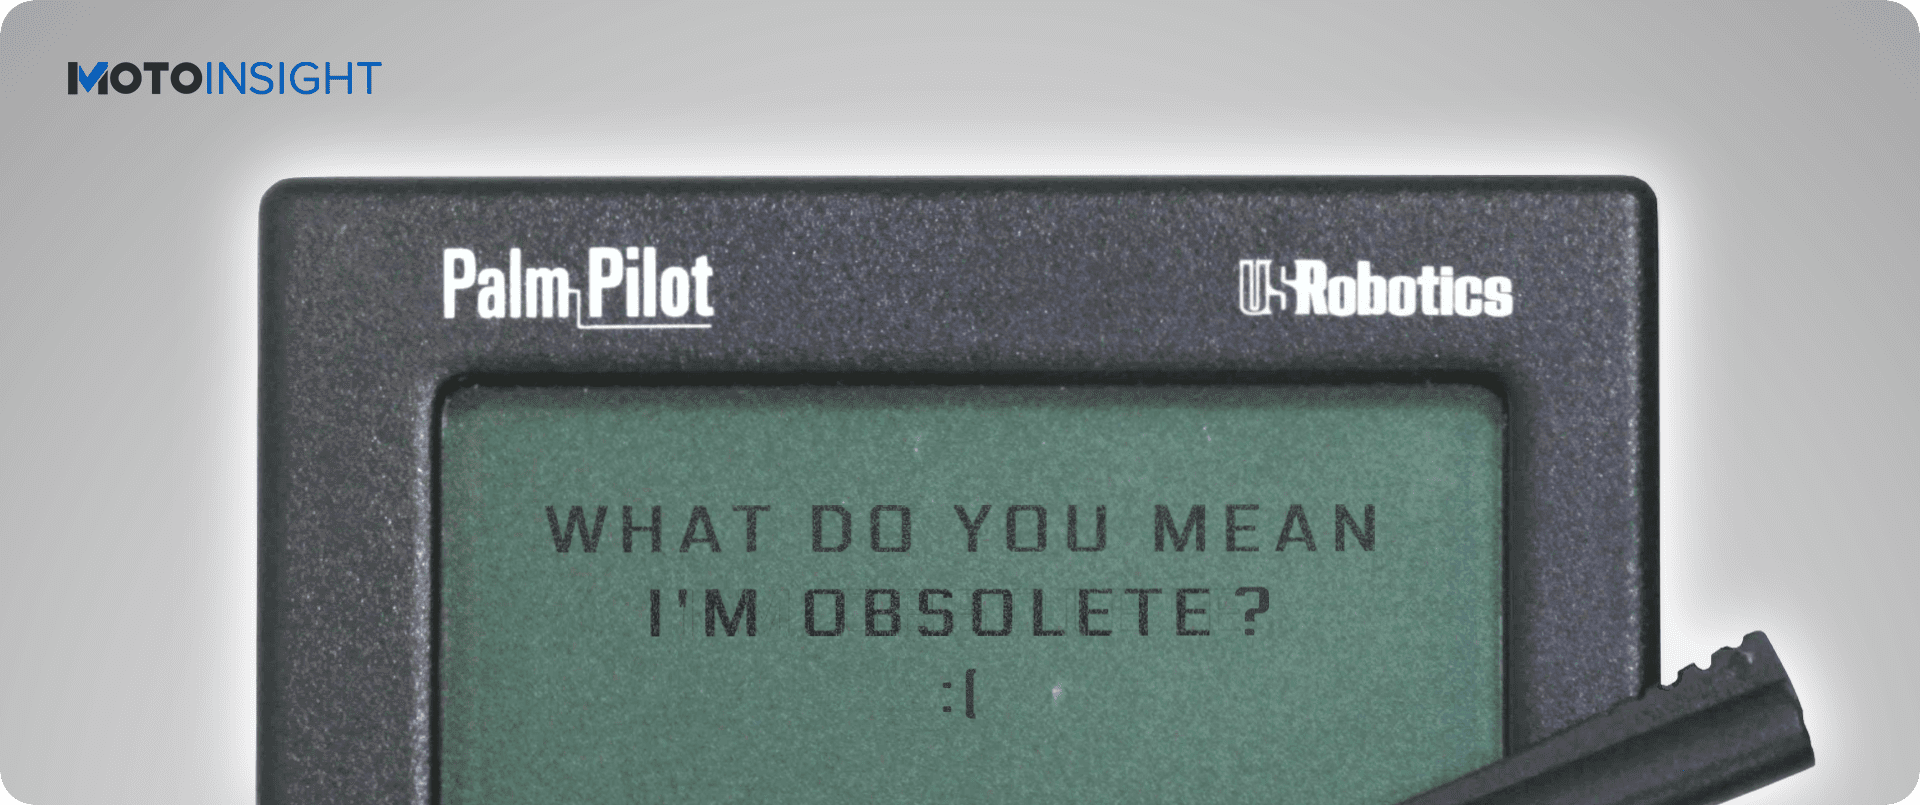 Palm Pilot displaying the words What do you mean I'm obsolete?